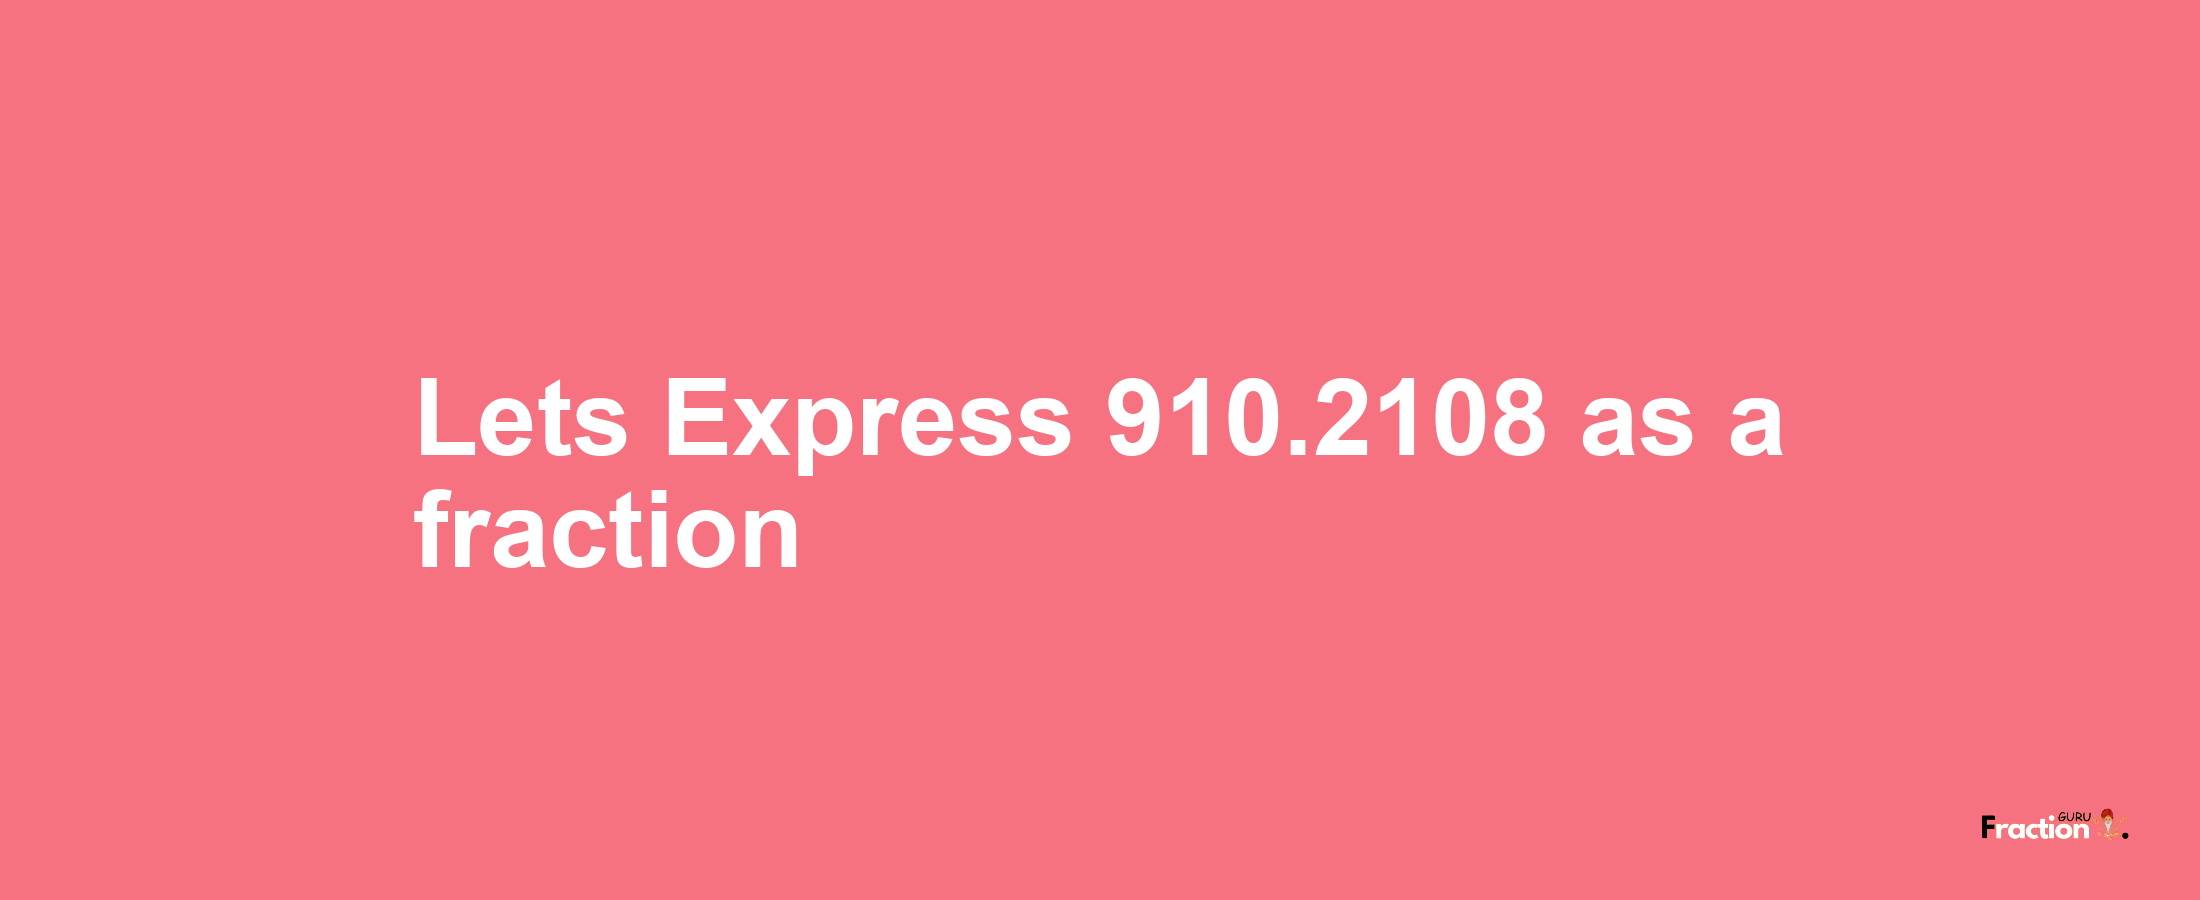 Lets Express 910.2108 as afraction